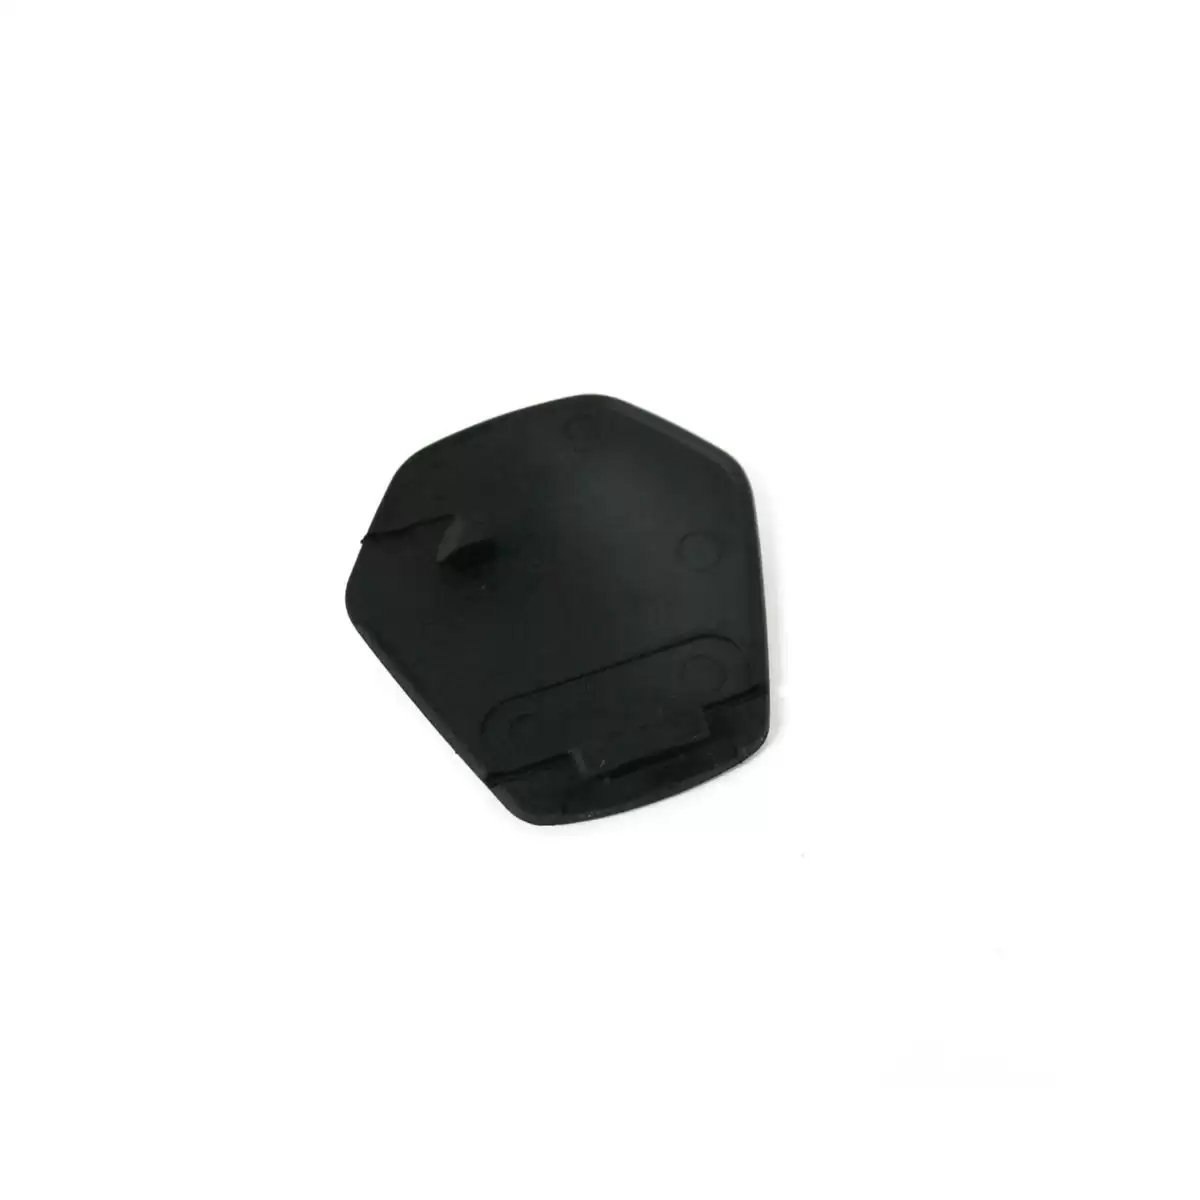 Rubber cover for charging port for Thron2, Jam2 and Sam2 with Bosch engine #1